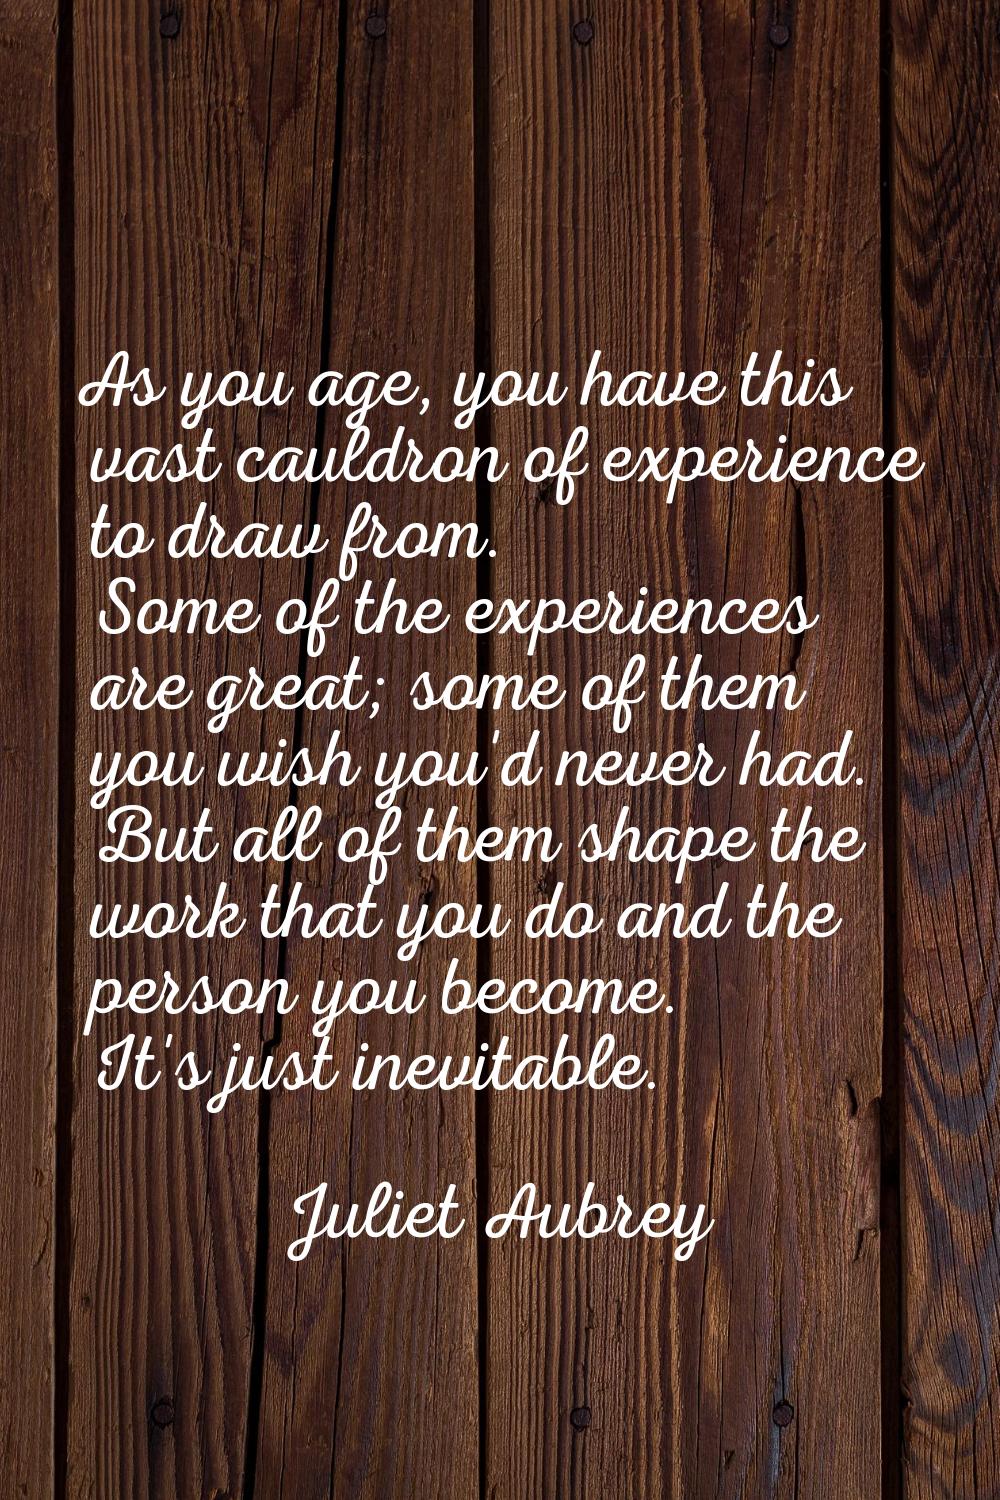 As you age, you have this vast cauldron of experience to draw from. Some of the experiences are gre